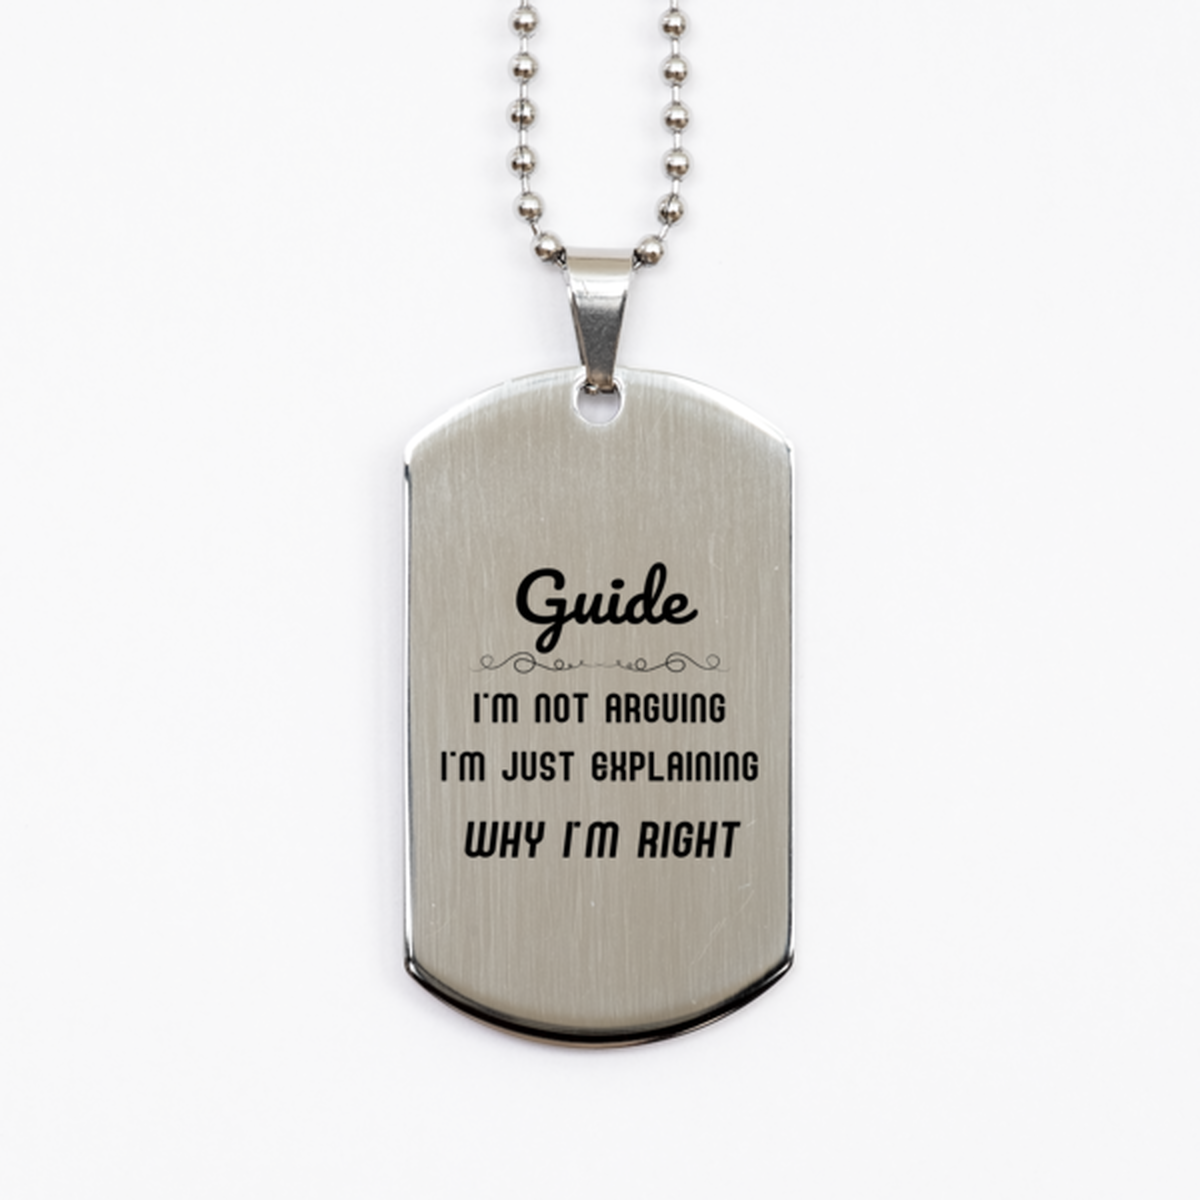 Guide I'm not Arguing. I'm Just Explaining Why I'm RIGHT Silver Dog Tag, Funny Saying Quote Guide Gifts For Guide Graduation Birthday Christmas Gifts for Men Women Coworker